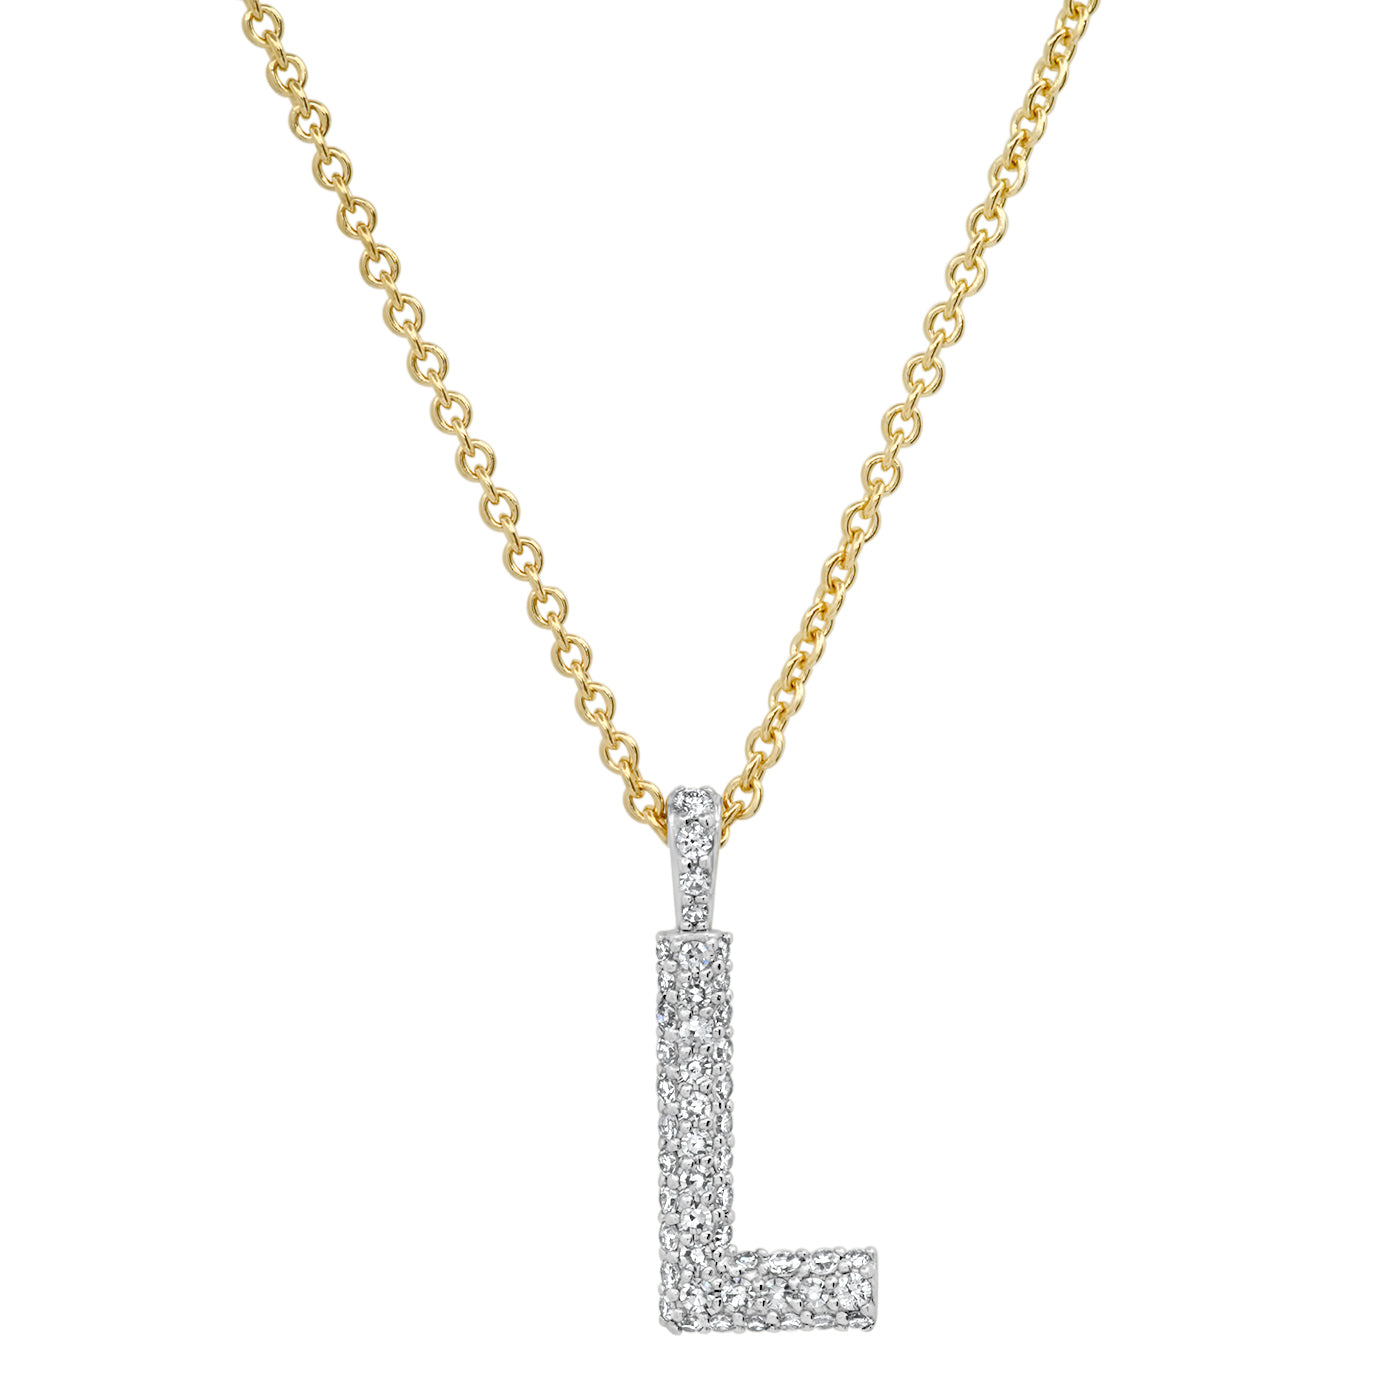 Initial Necklace with Diamonds - 14K White Gold